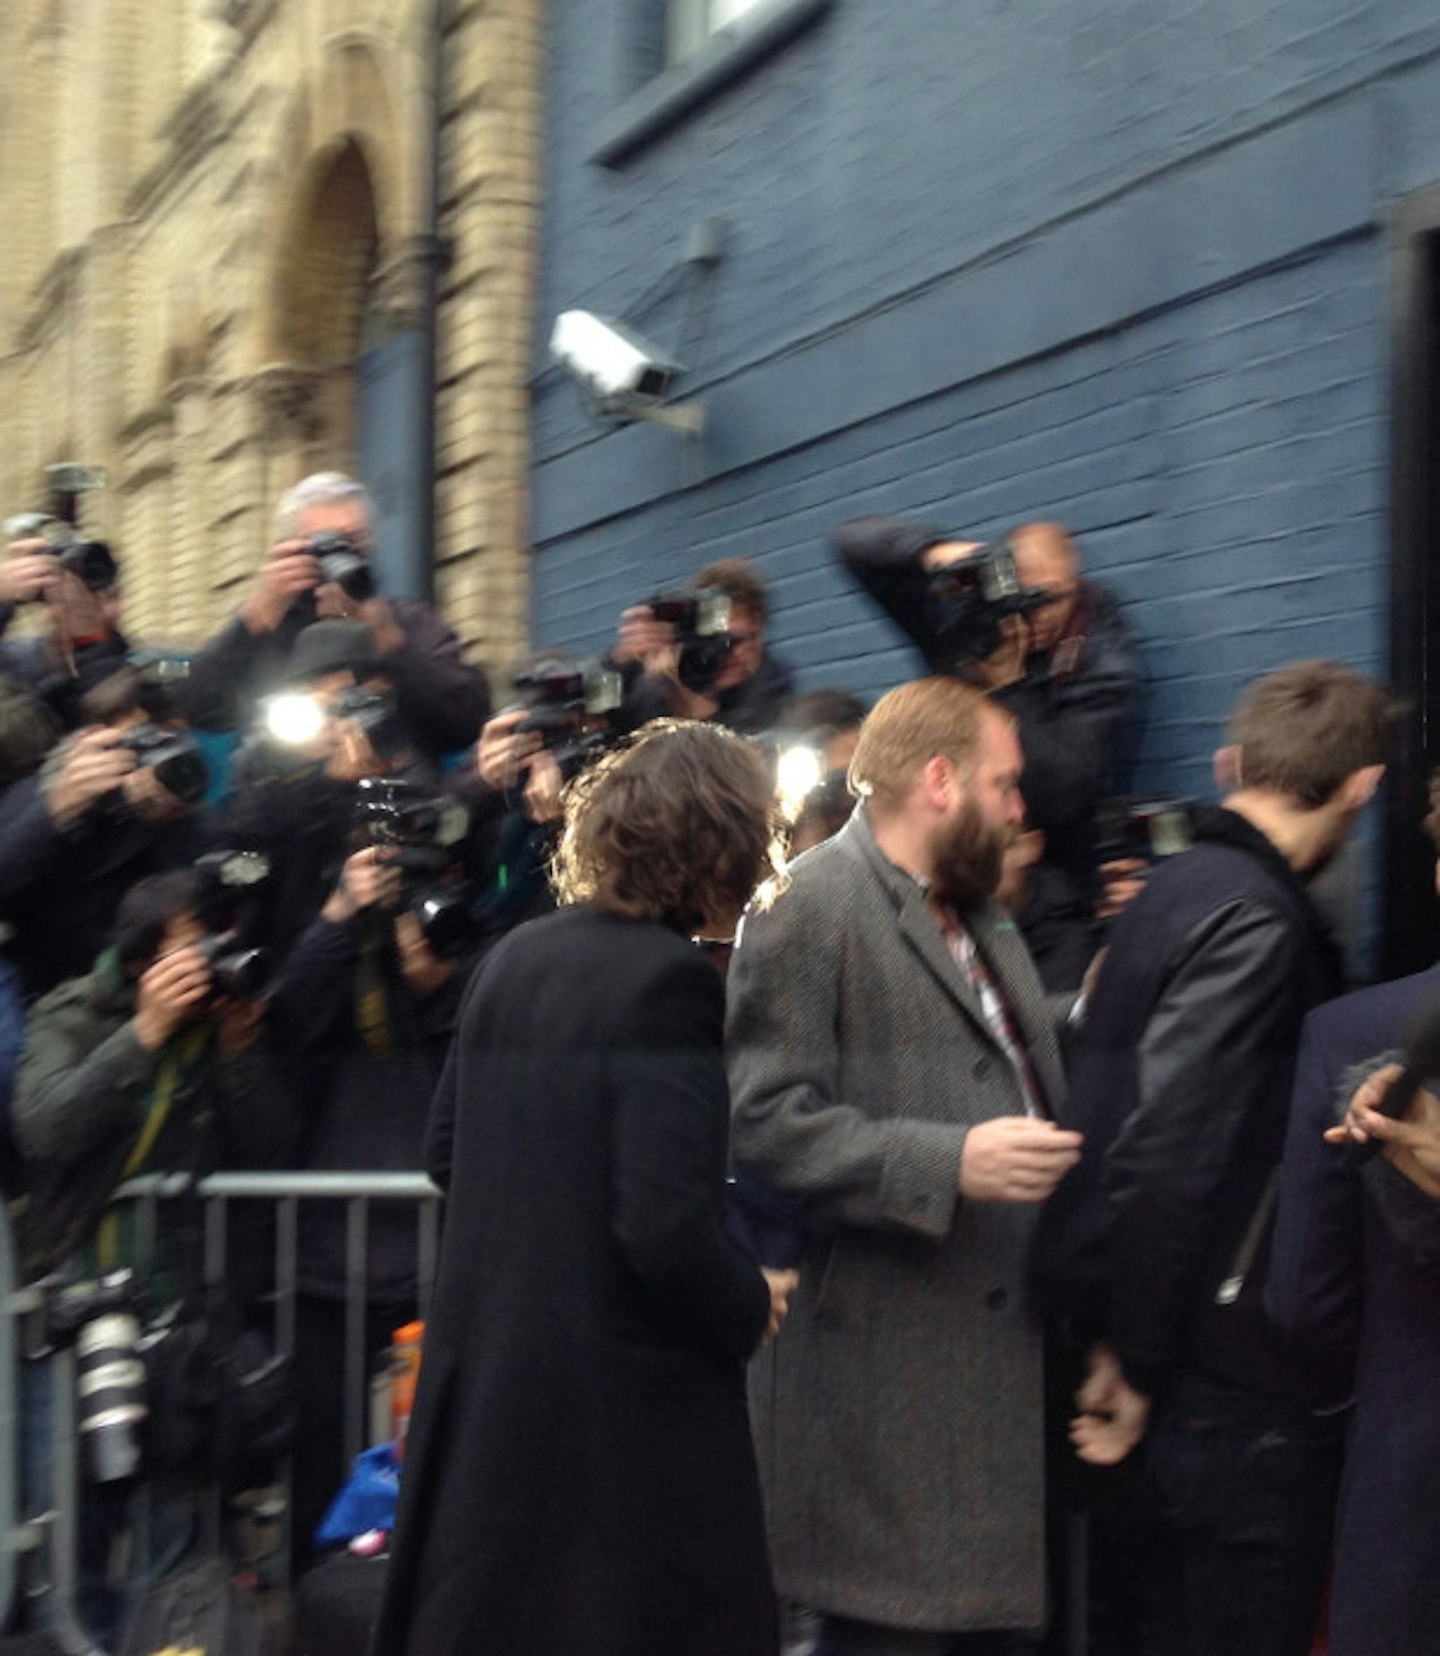 Harry Styles (or at least the back of his head)